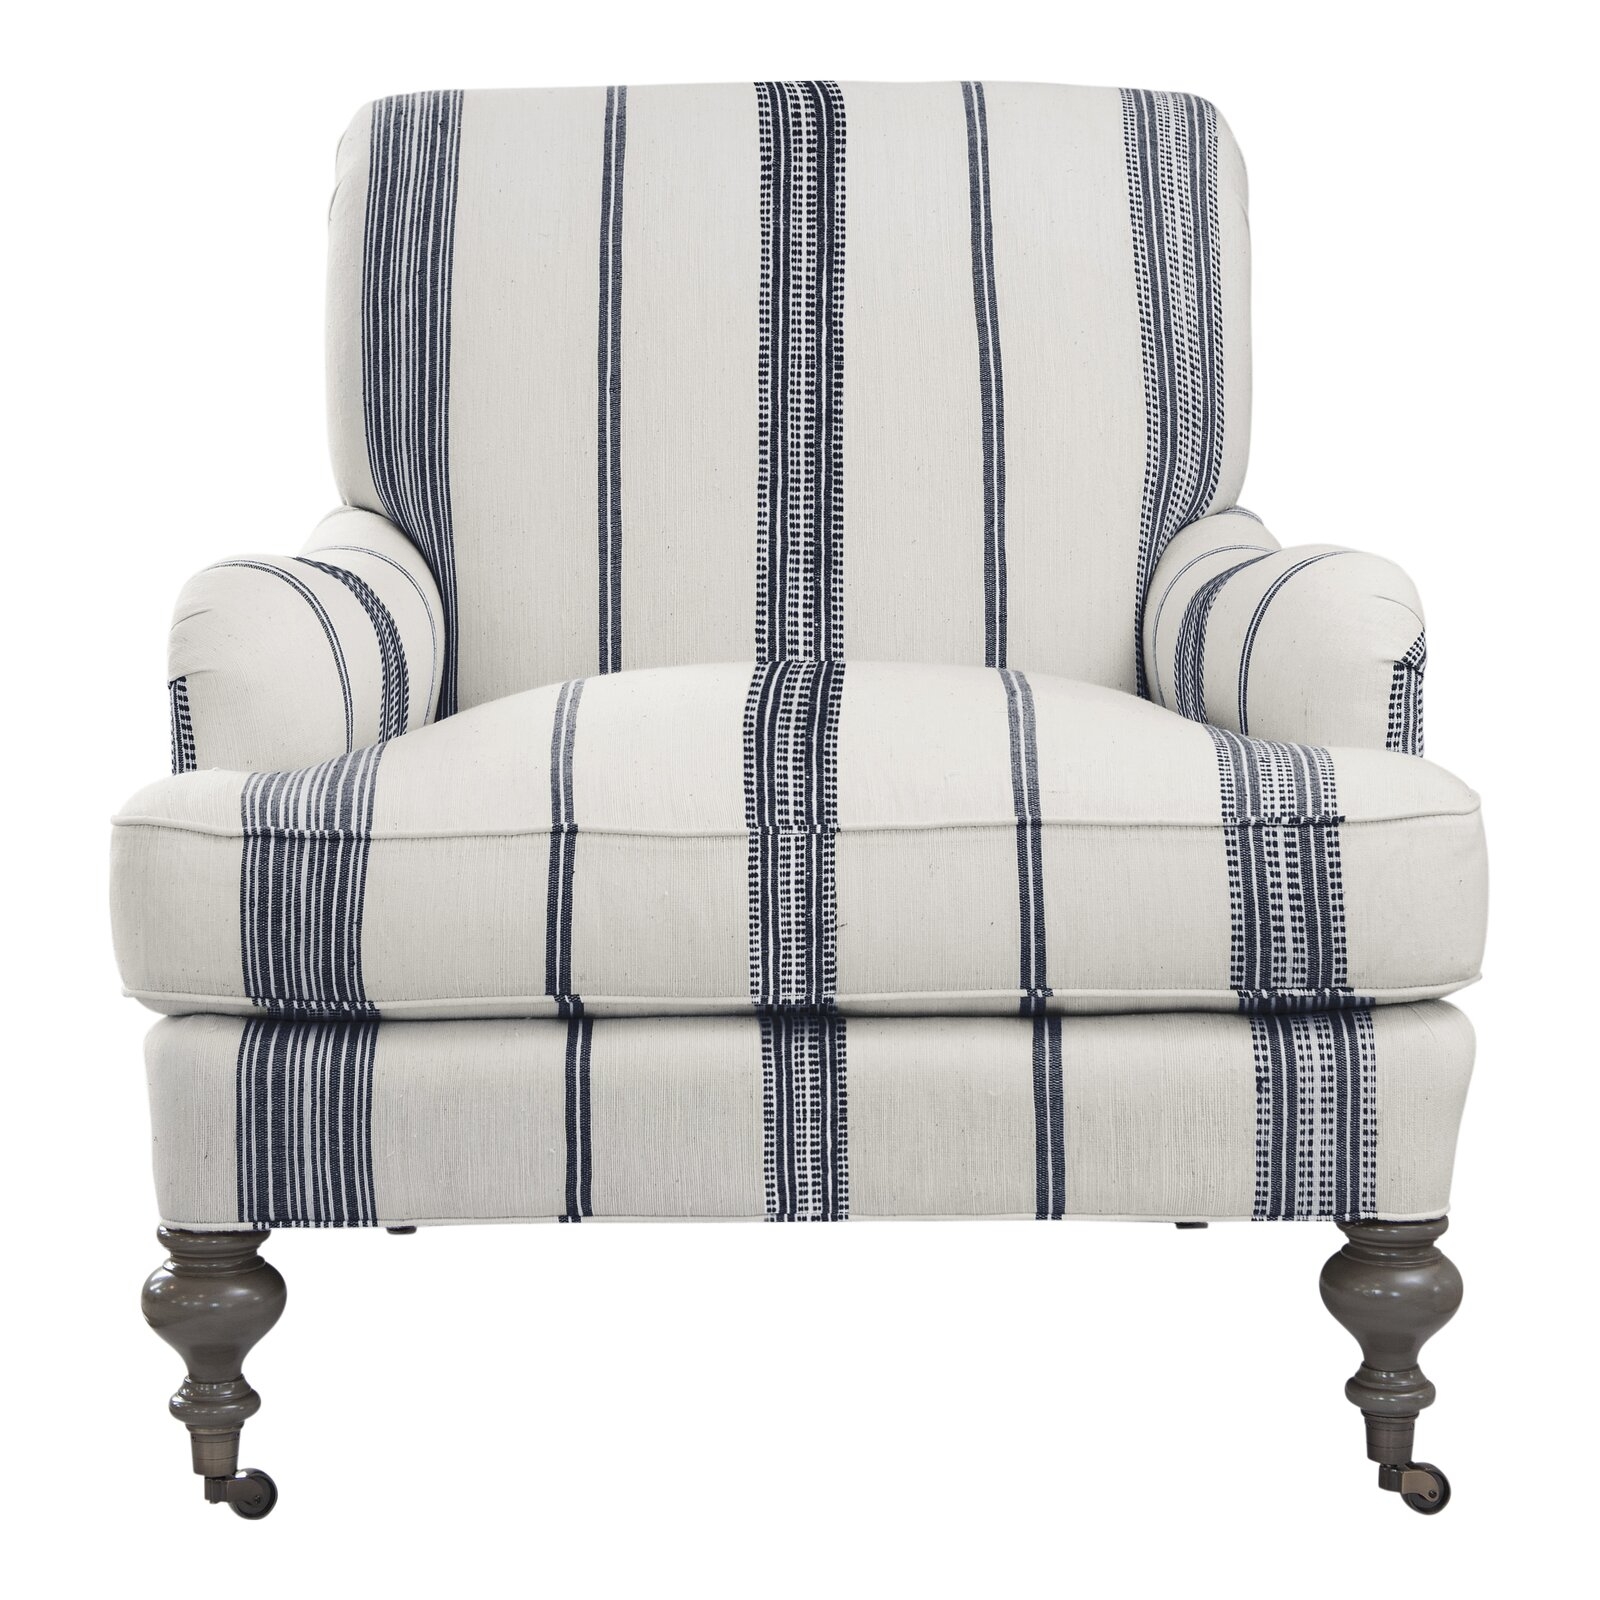 Imagine Home Chatsworth 33" W Cotton Armchair Fabric: Natural/Navy Stripe - Image 1